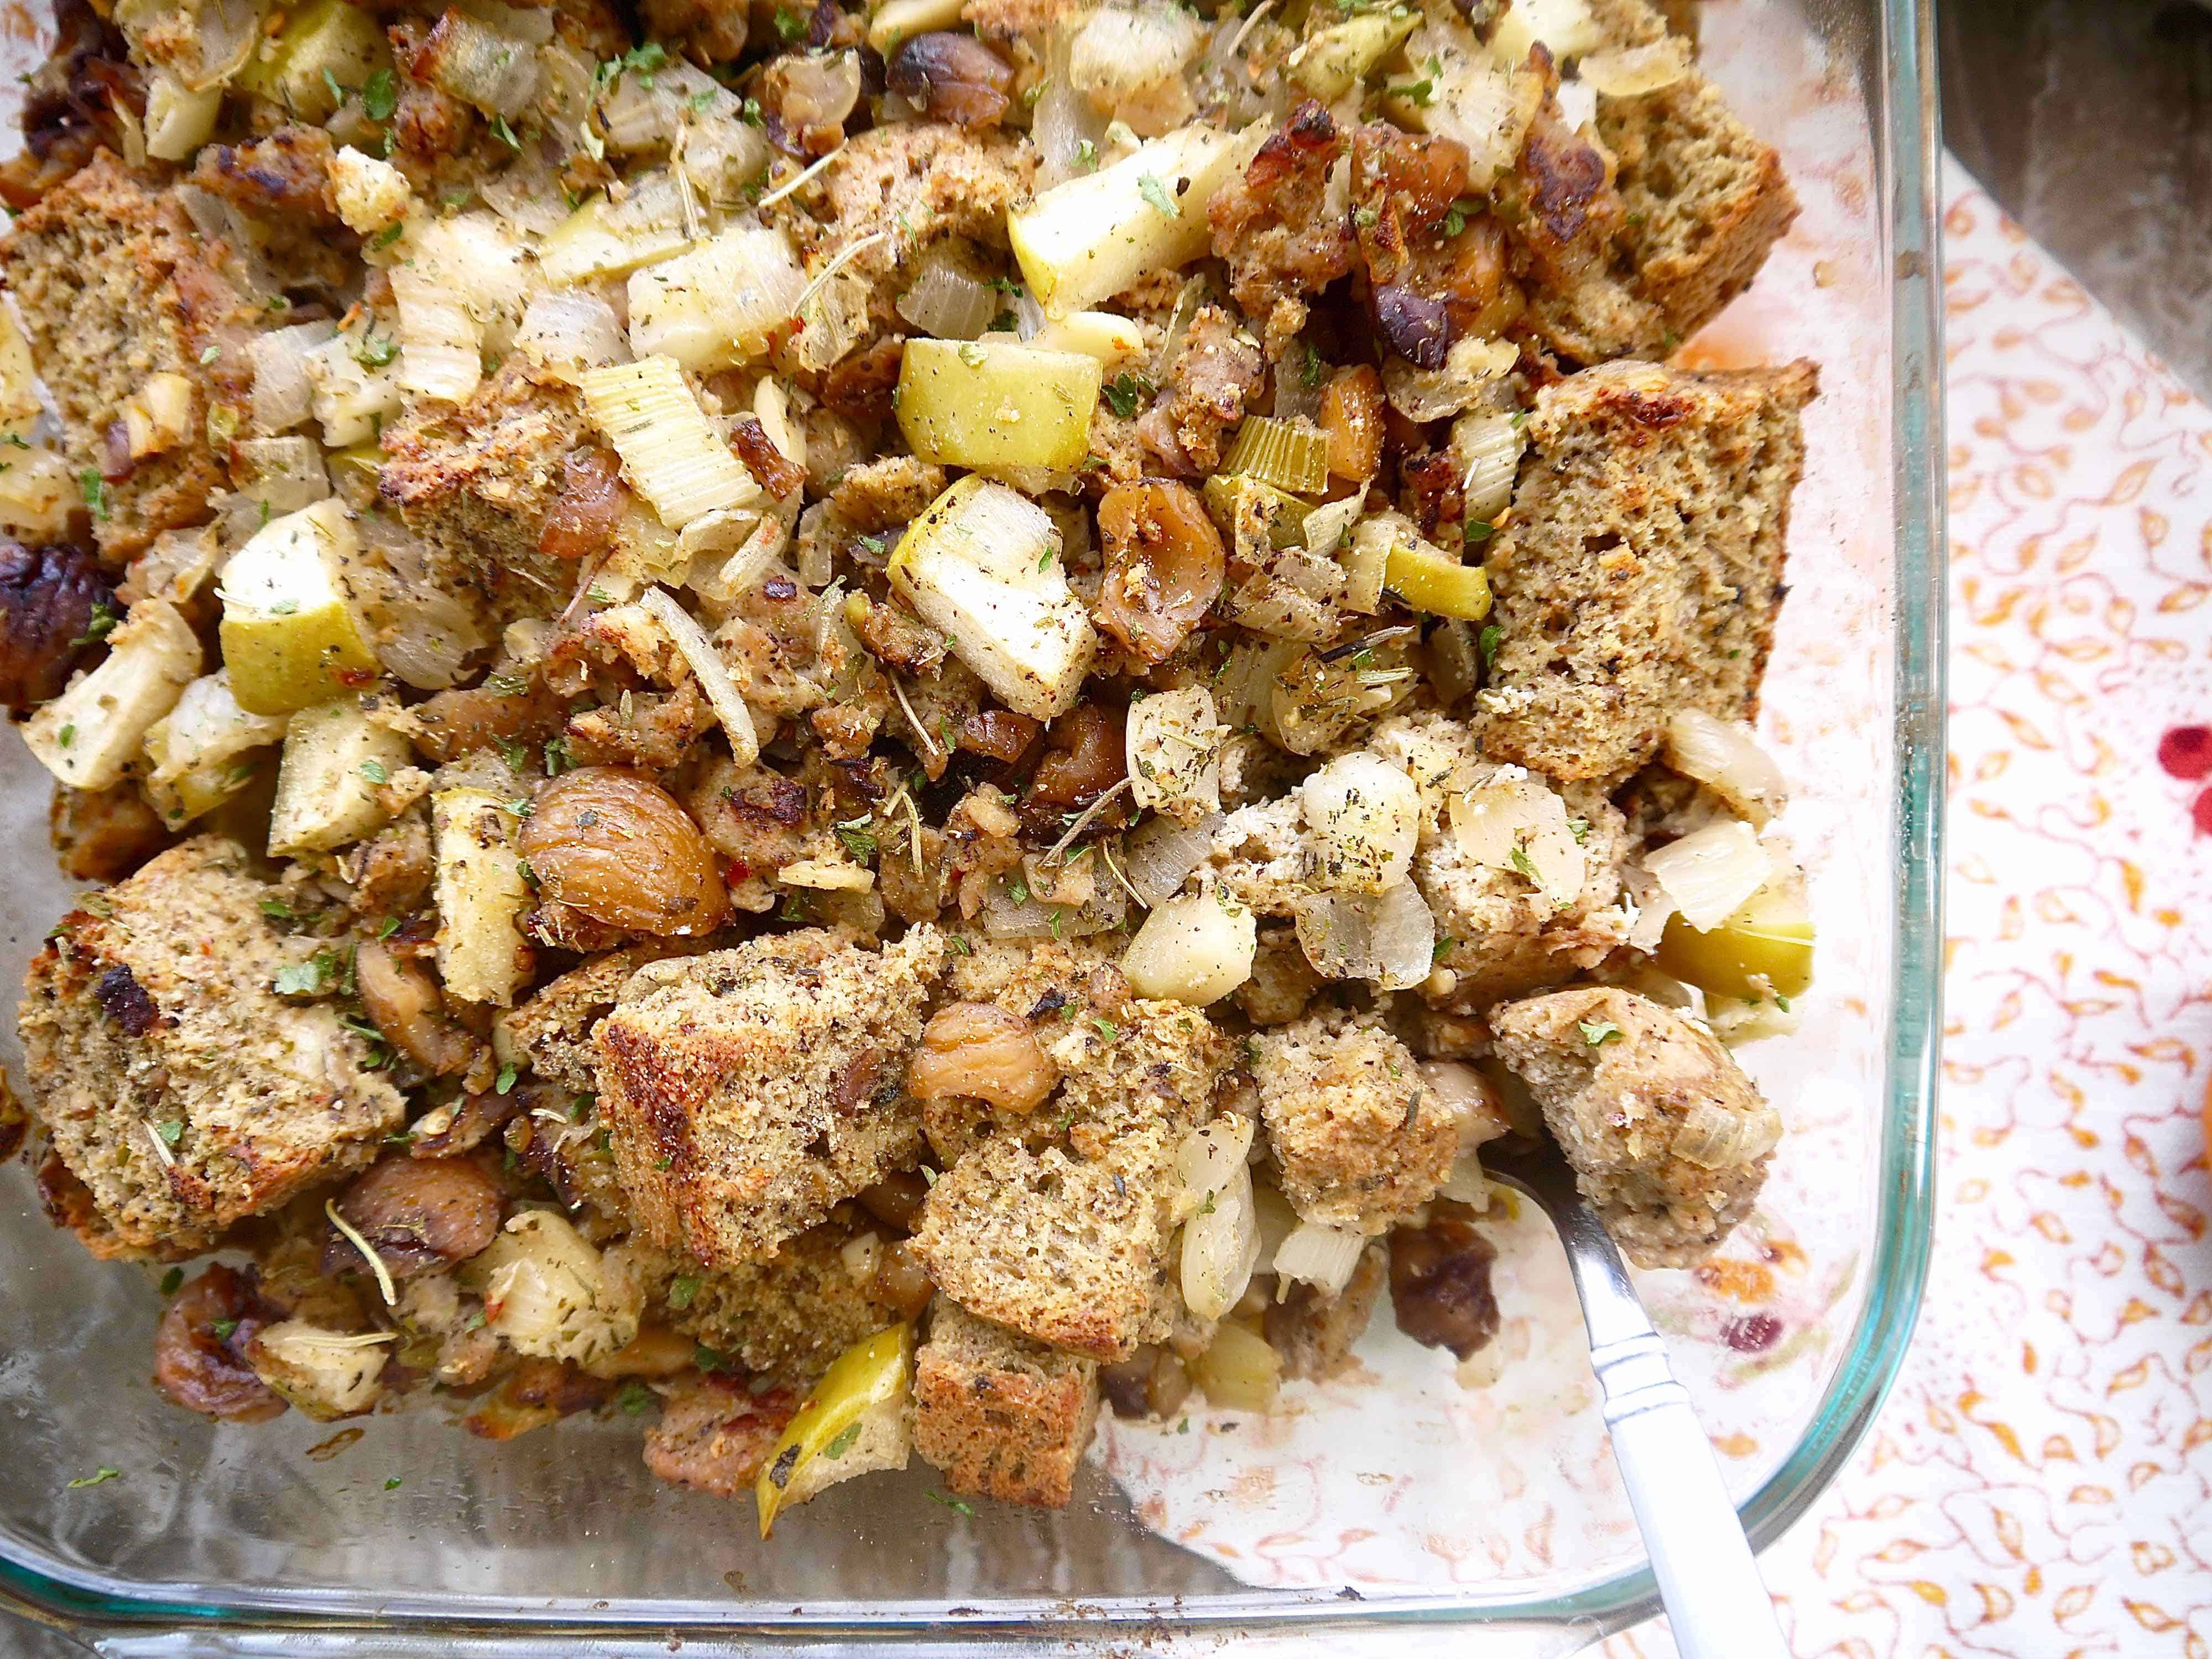 Paleo stuffing with sausage, apple, chestnut in a large baking pan.